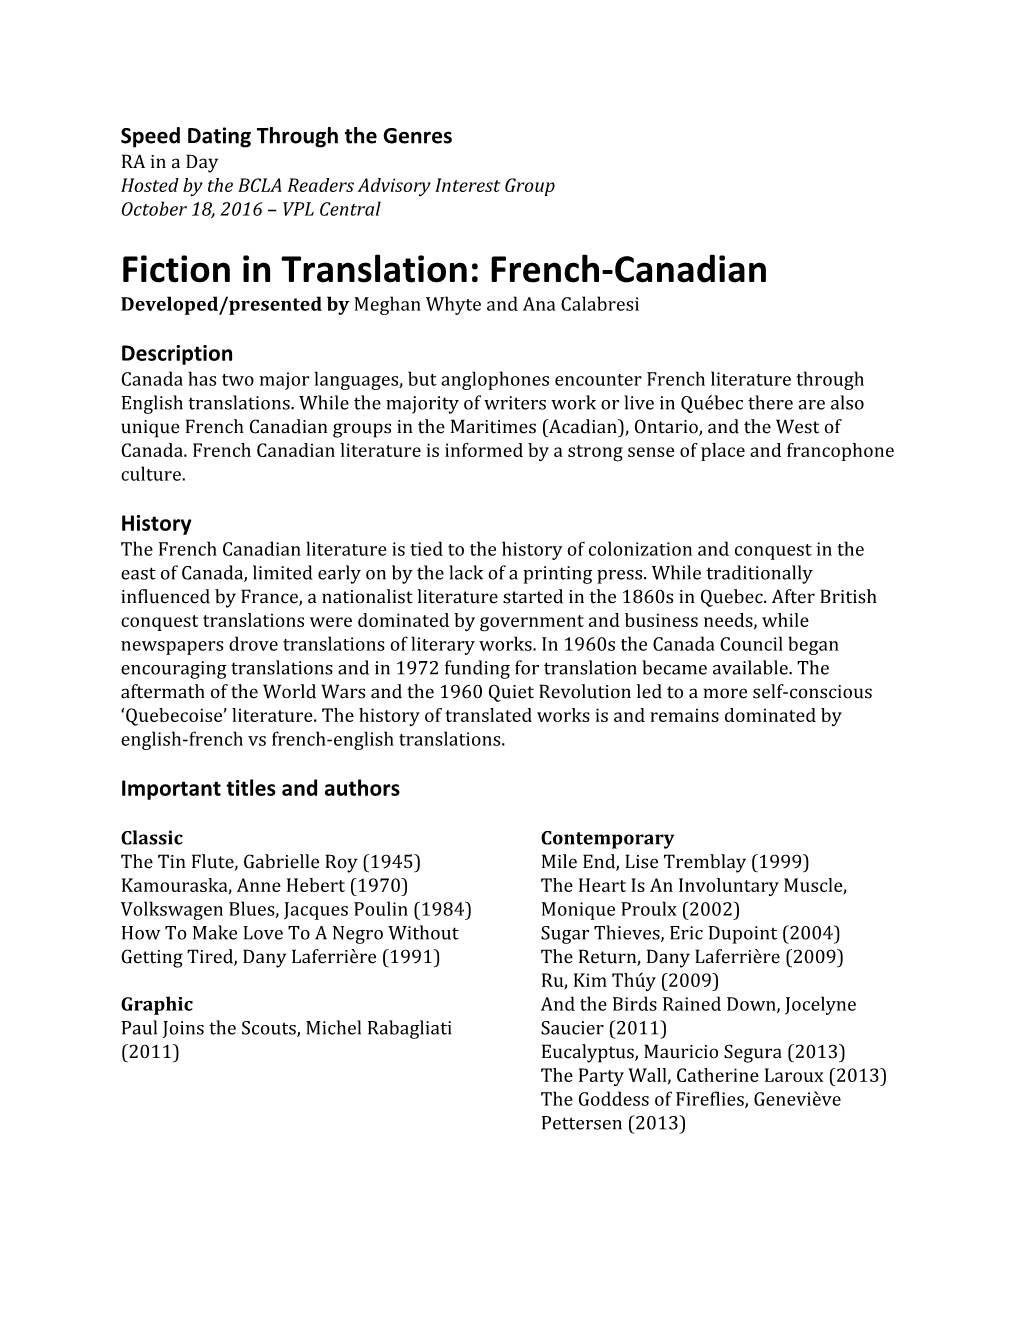 French-Canadian Developed/Presented by Meghan Whyte and Ana Calabresi ​